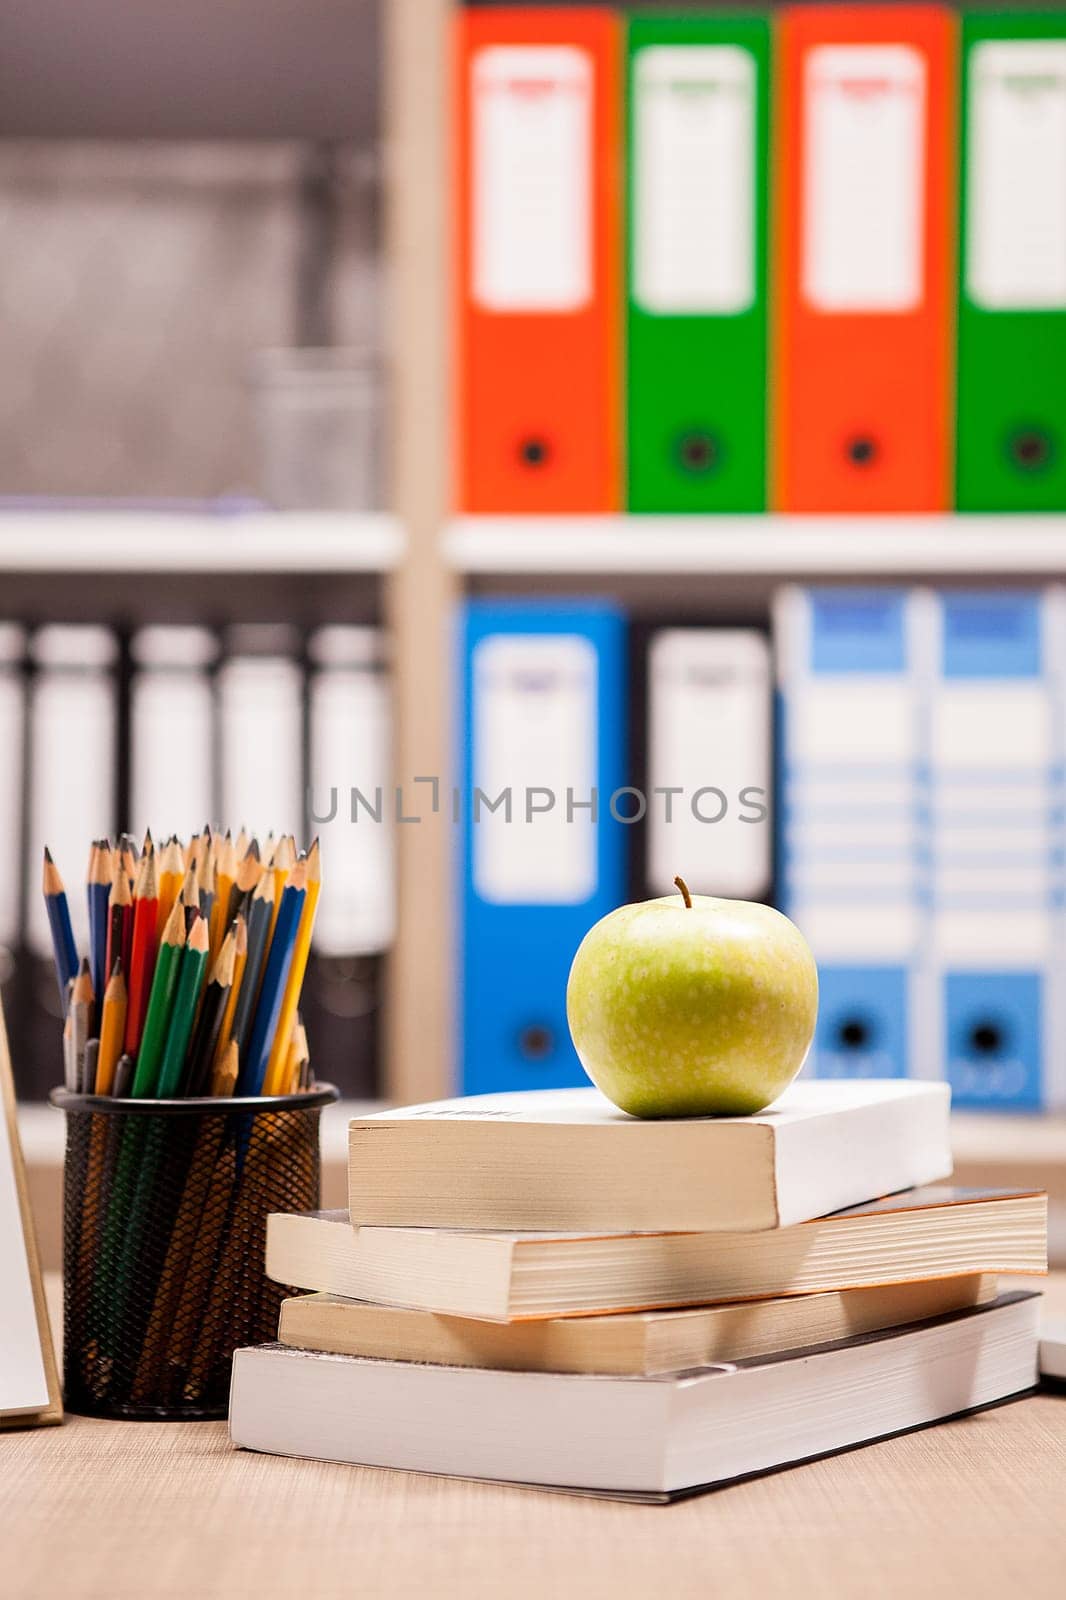 Green apple on pile of books next to a notebook and pencils on t by DCStudio